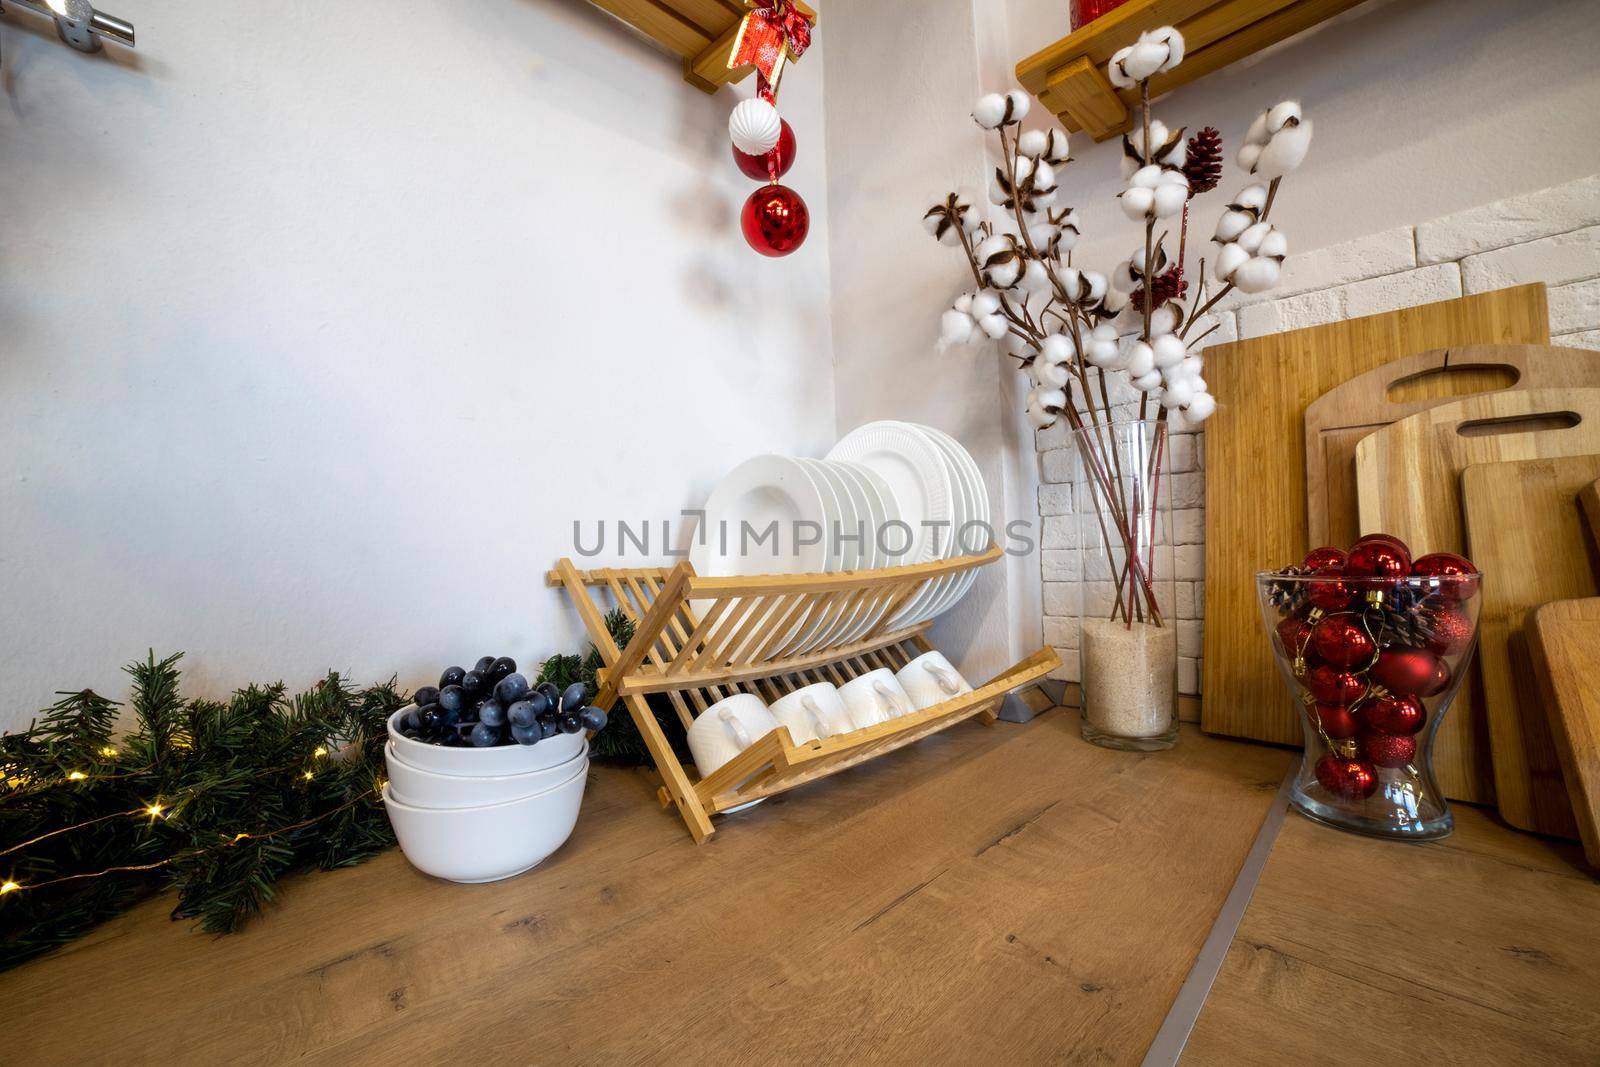 cozy kitchen decorated for Christmas. plate dryer on a wooden work surface